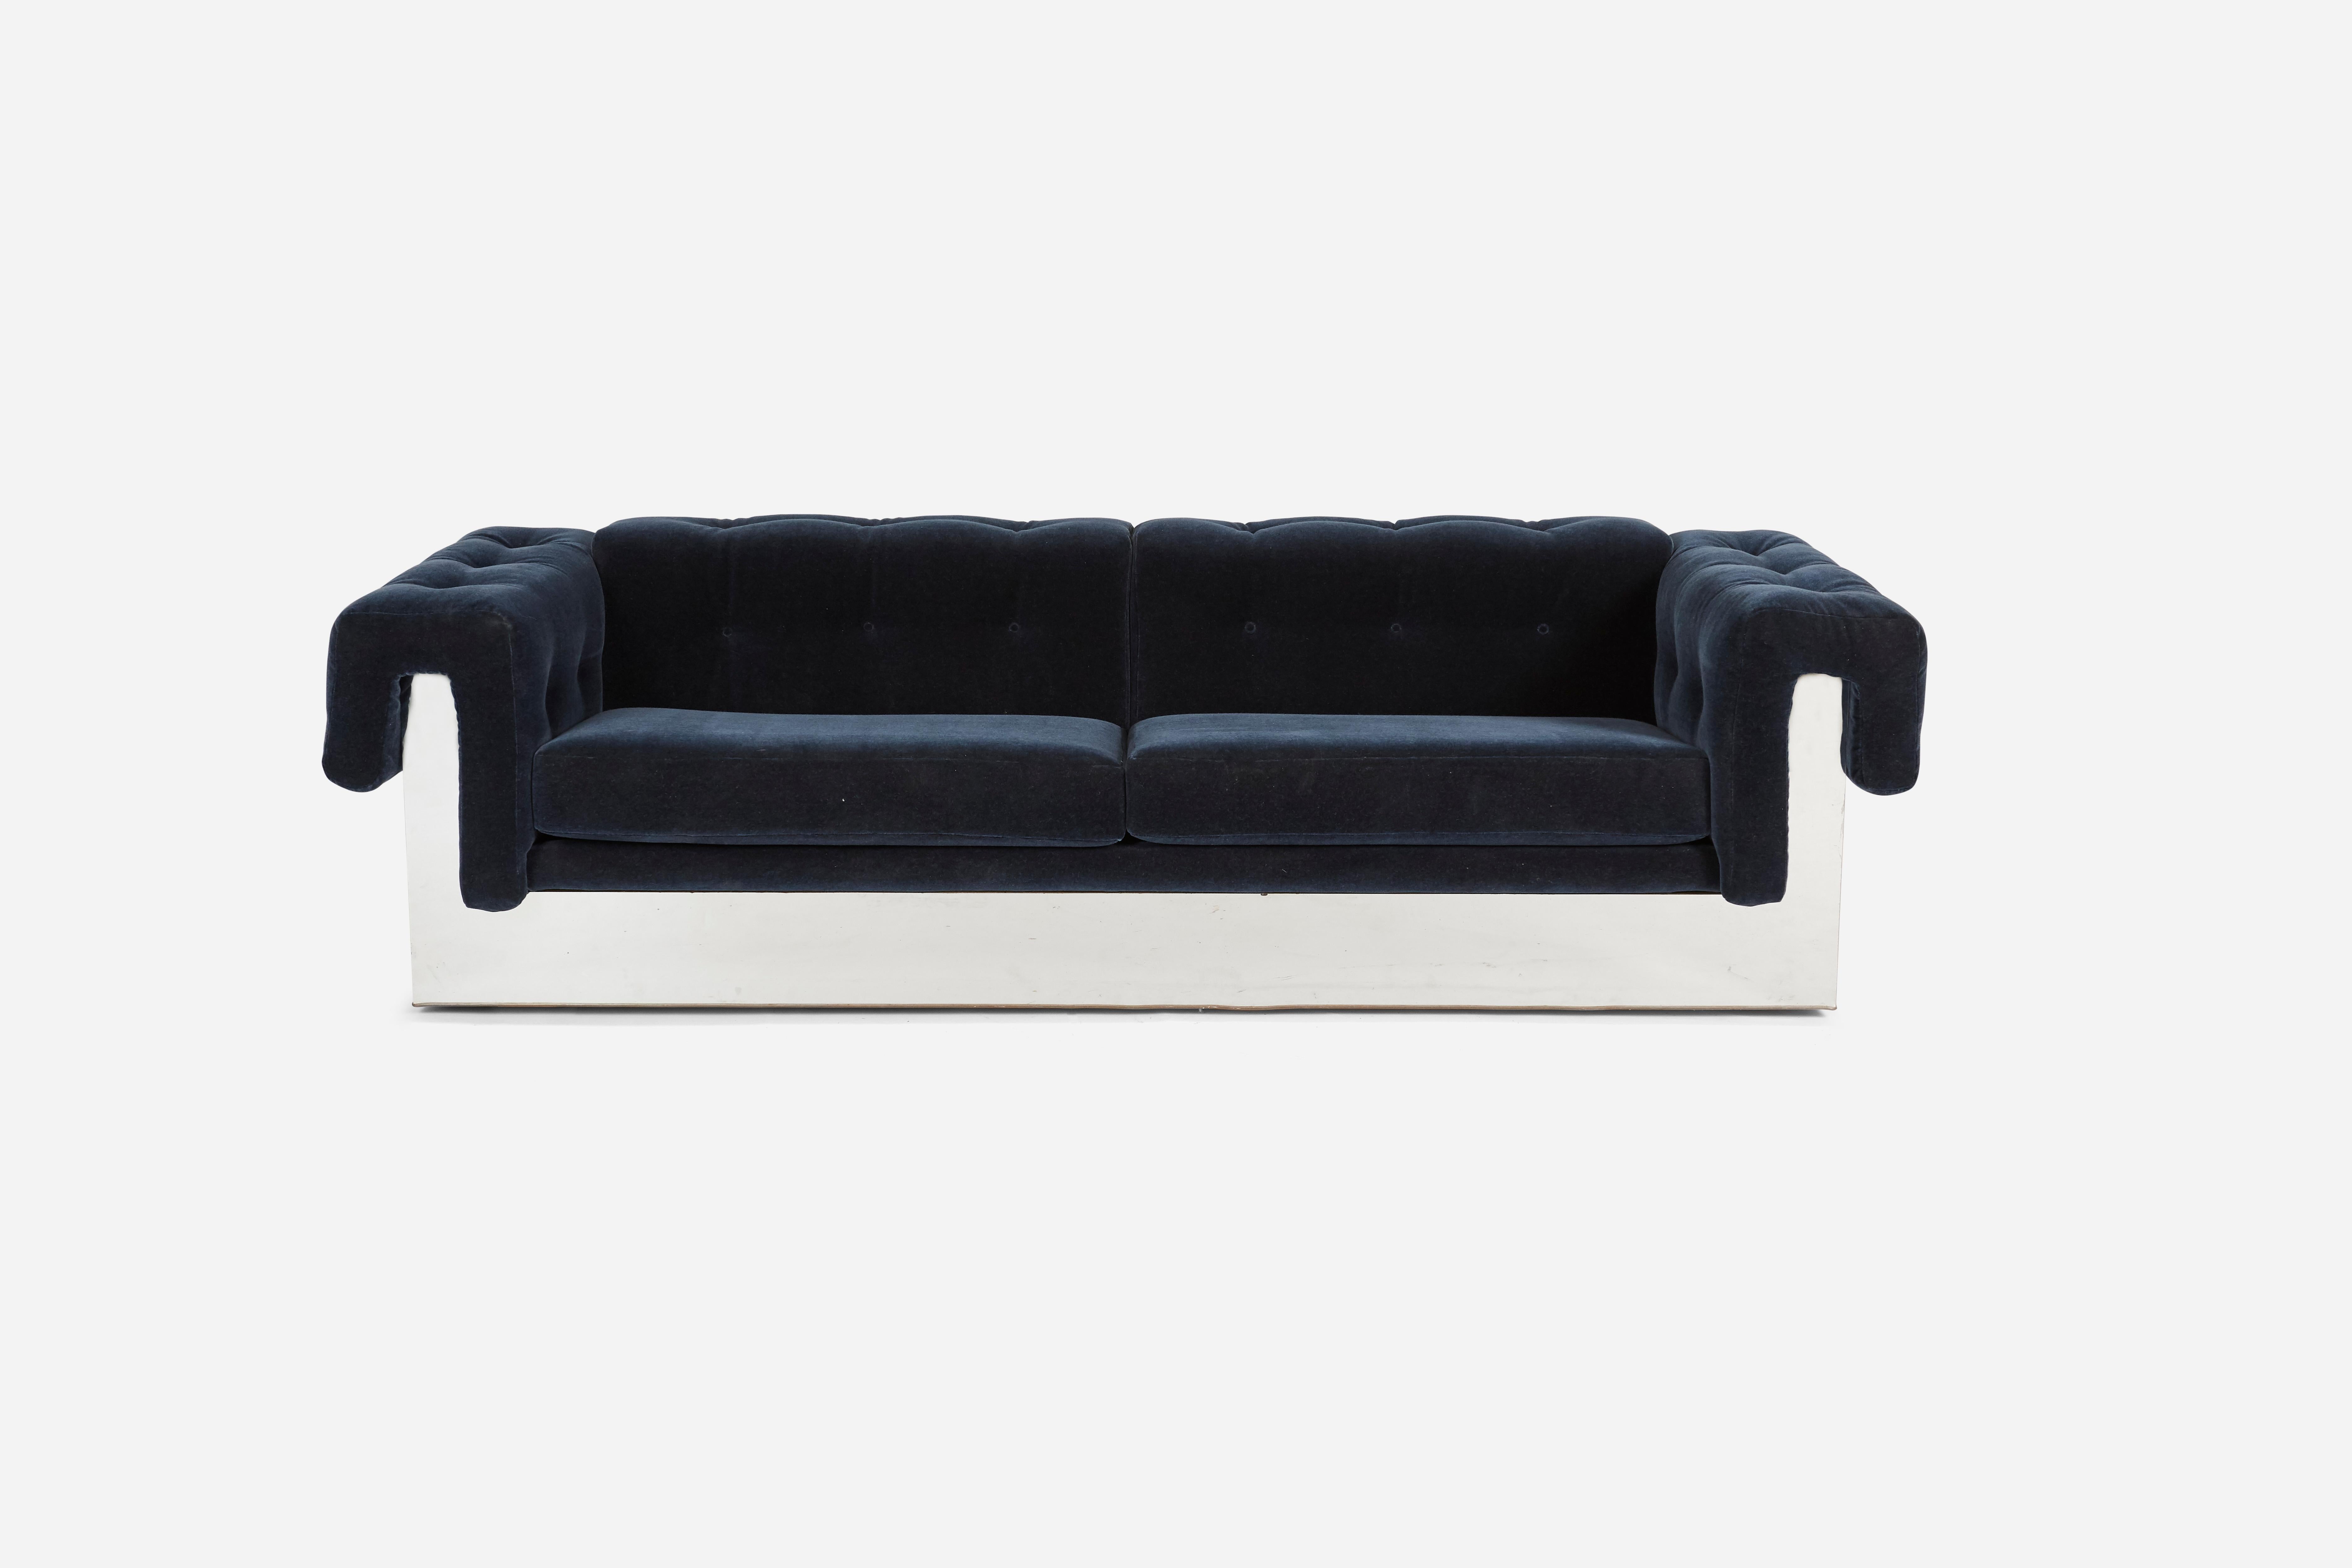 Rare chrome case sofa by Milo Baughman. Fully restored and reupholstered in beautiful blue mohair.